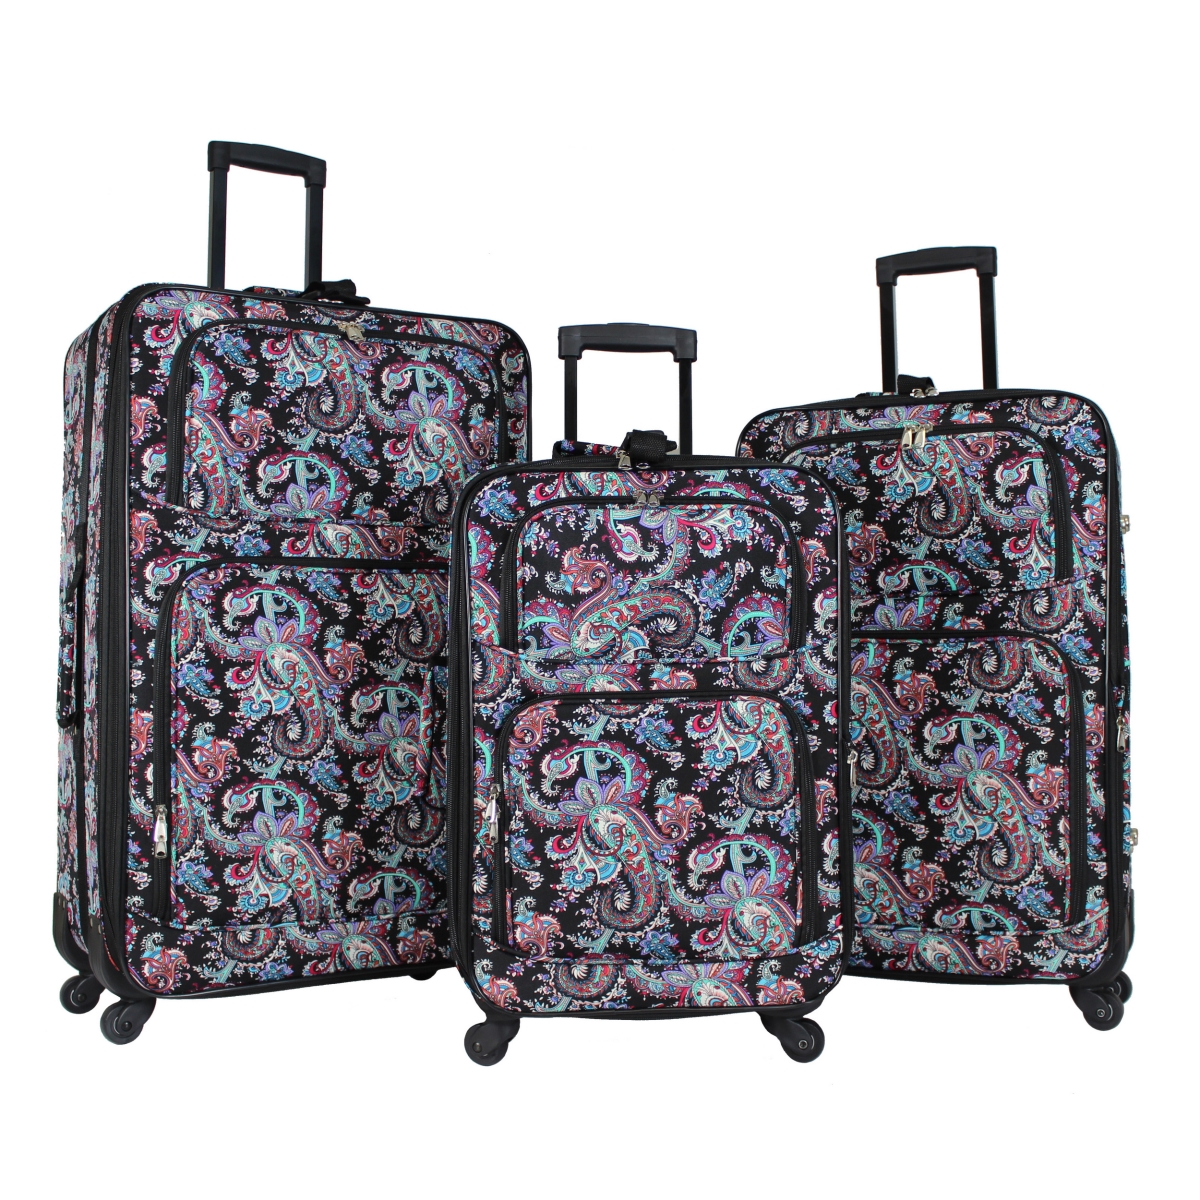 818703-207 Rolling Expandable Spinner Luggage Set - Paisley, 3 Piece